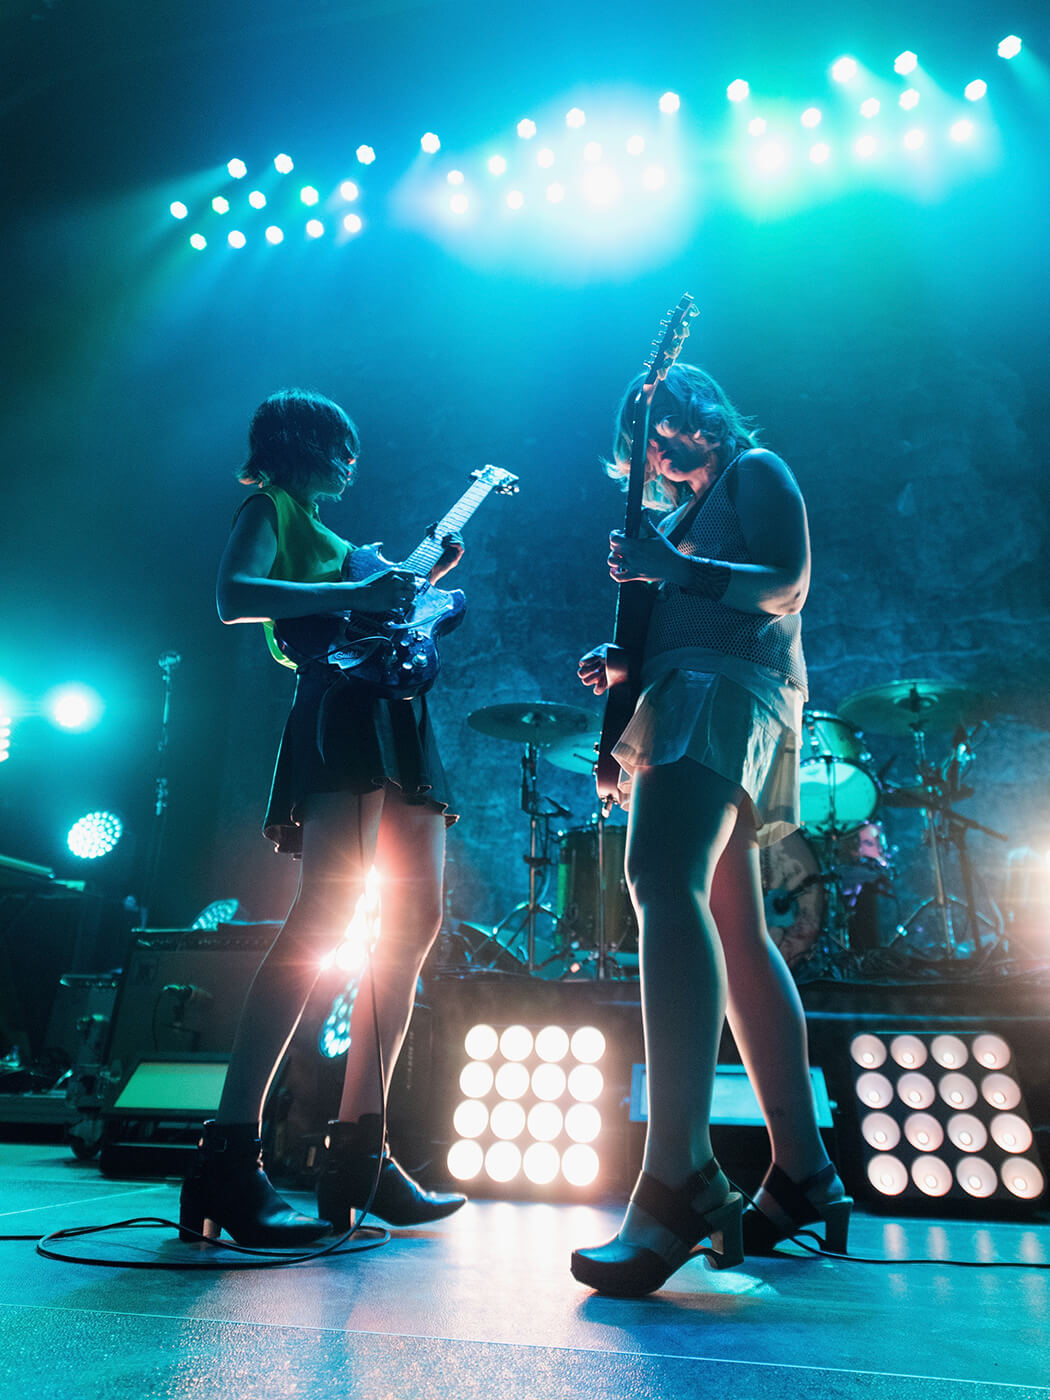 Carrie Brownstein and Corin Tucker of Sleater-Kinney performing at The Tabernacle in 2015, photo by Paul R. Giunta/Getty Images